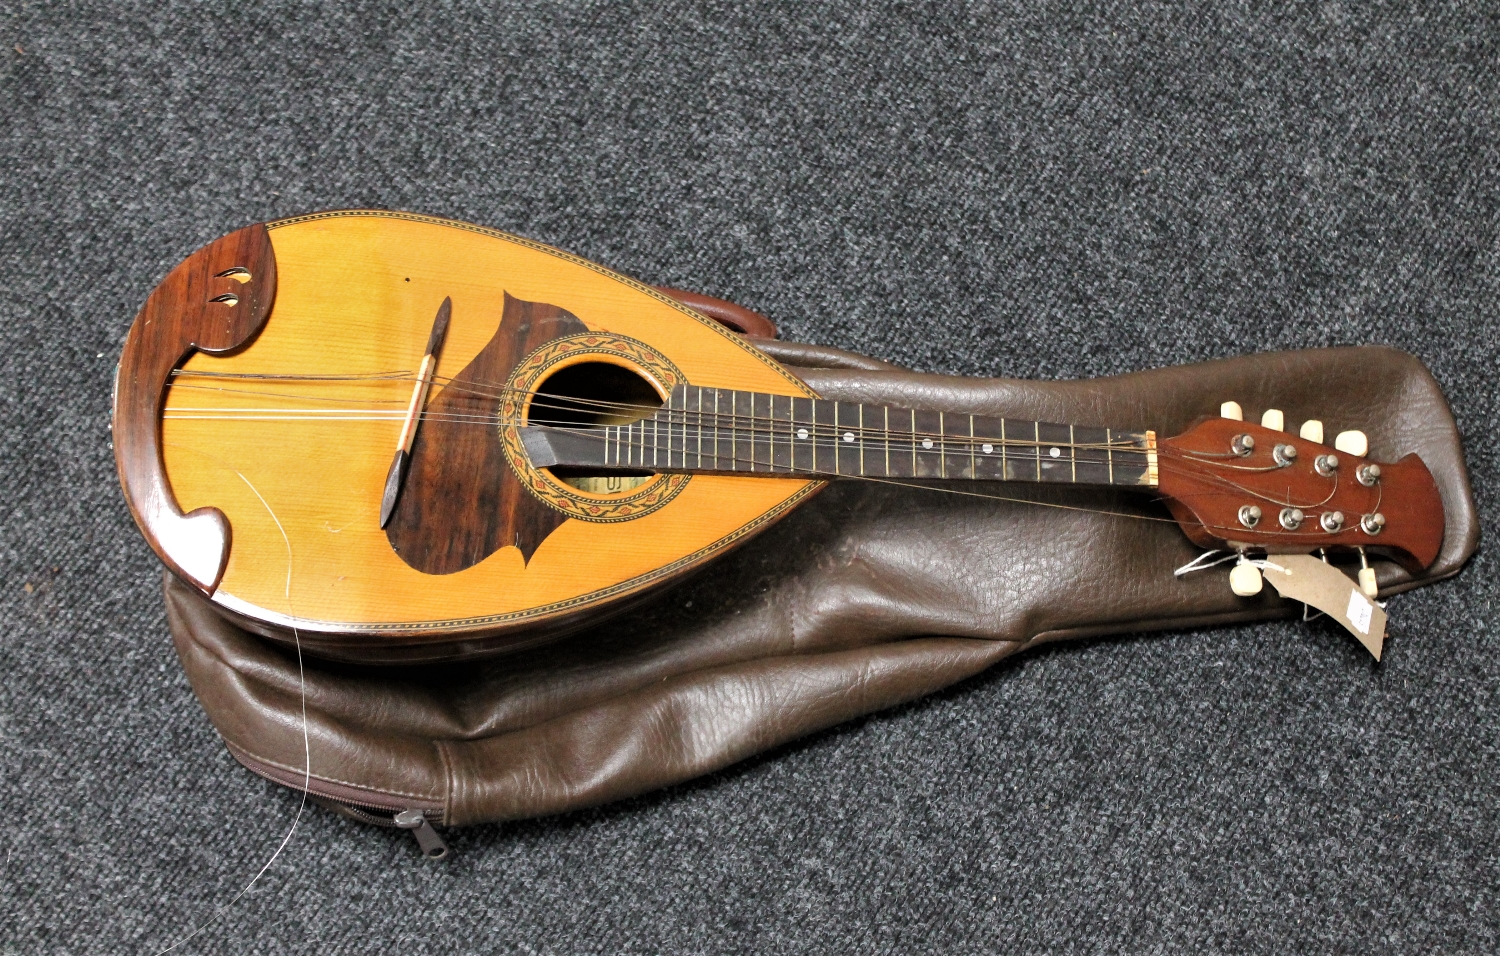 A Suzuki bowl backed eight string mandolin in carry bag